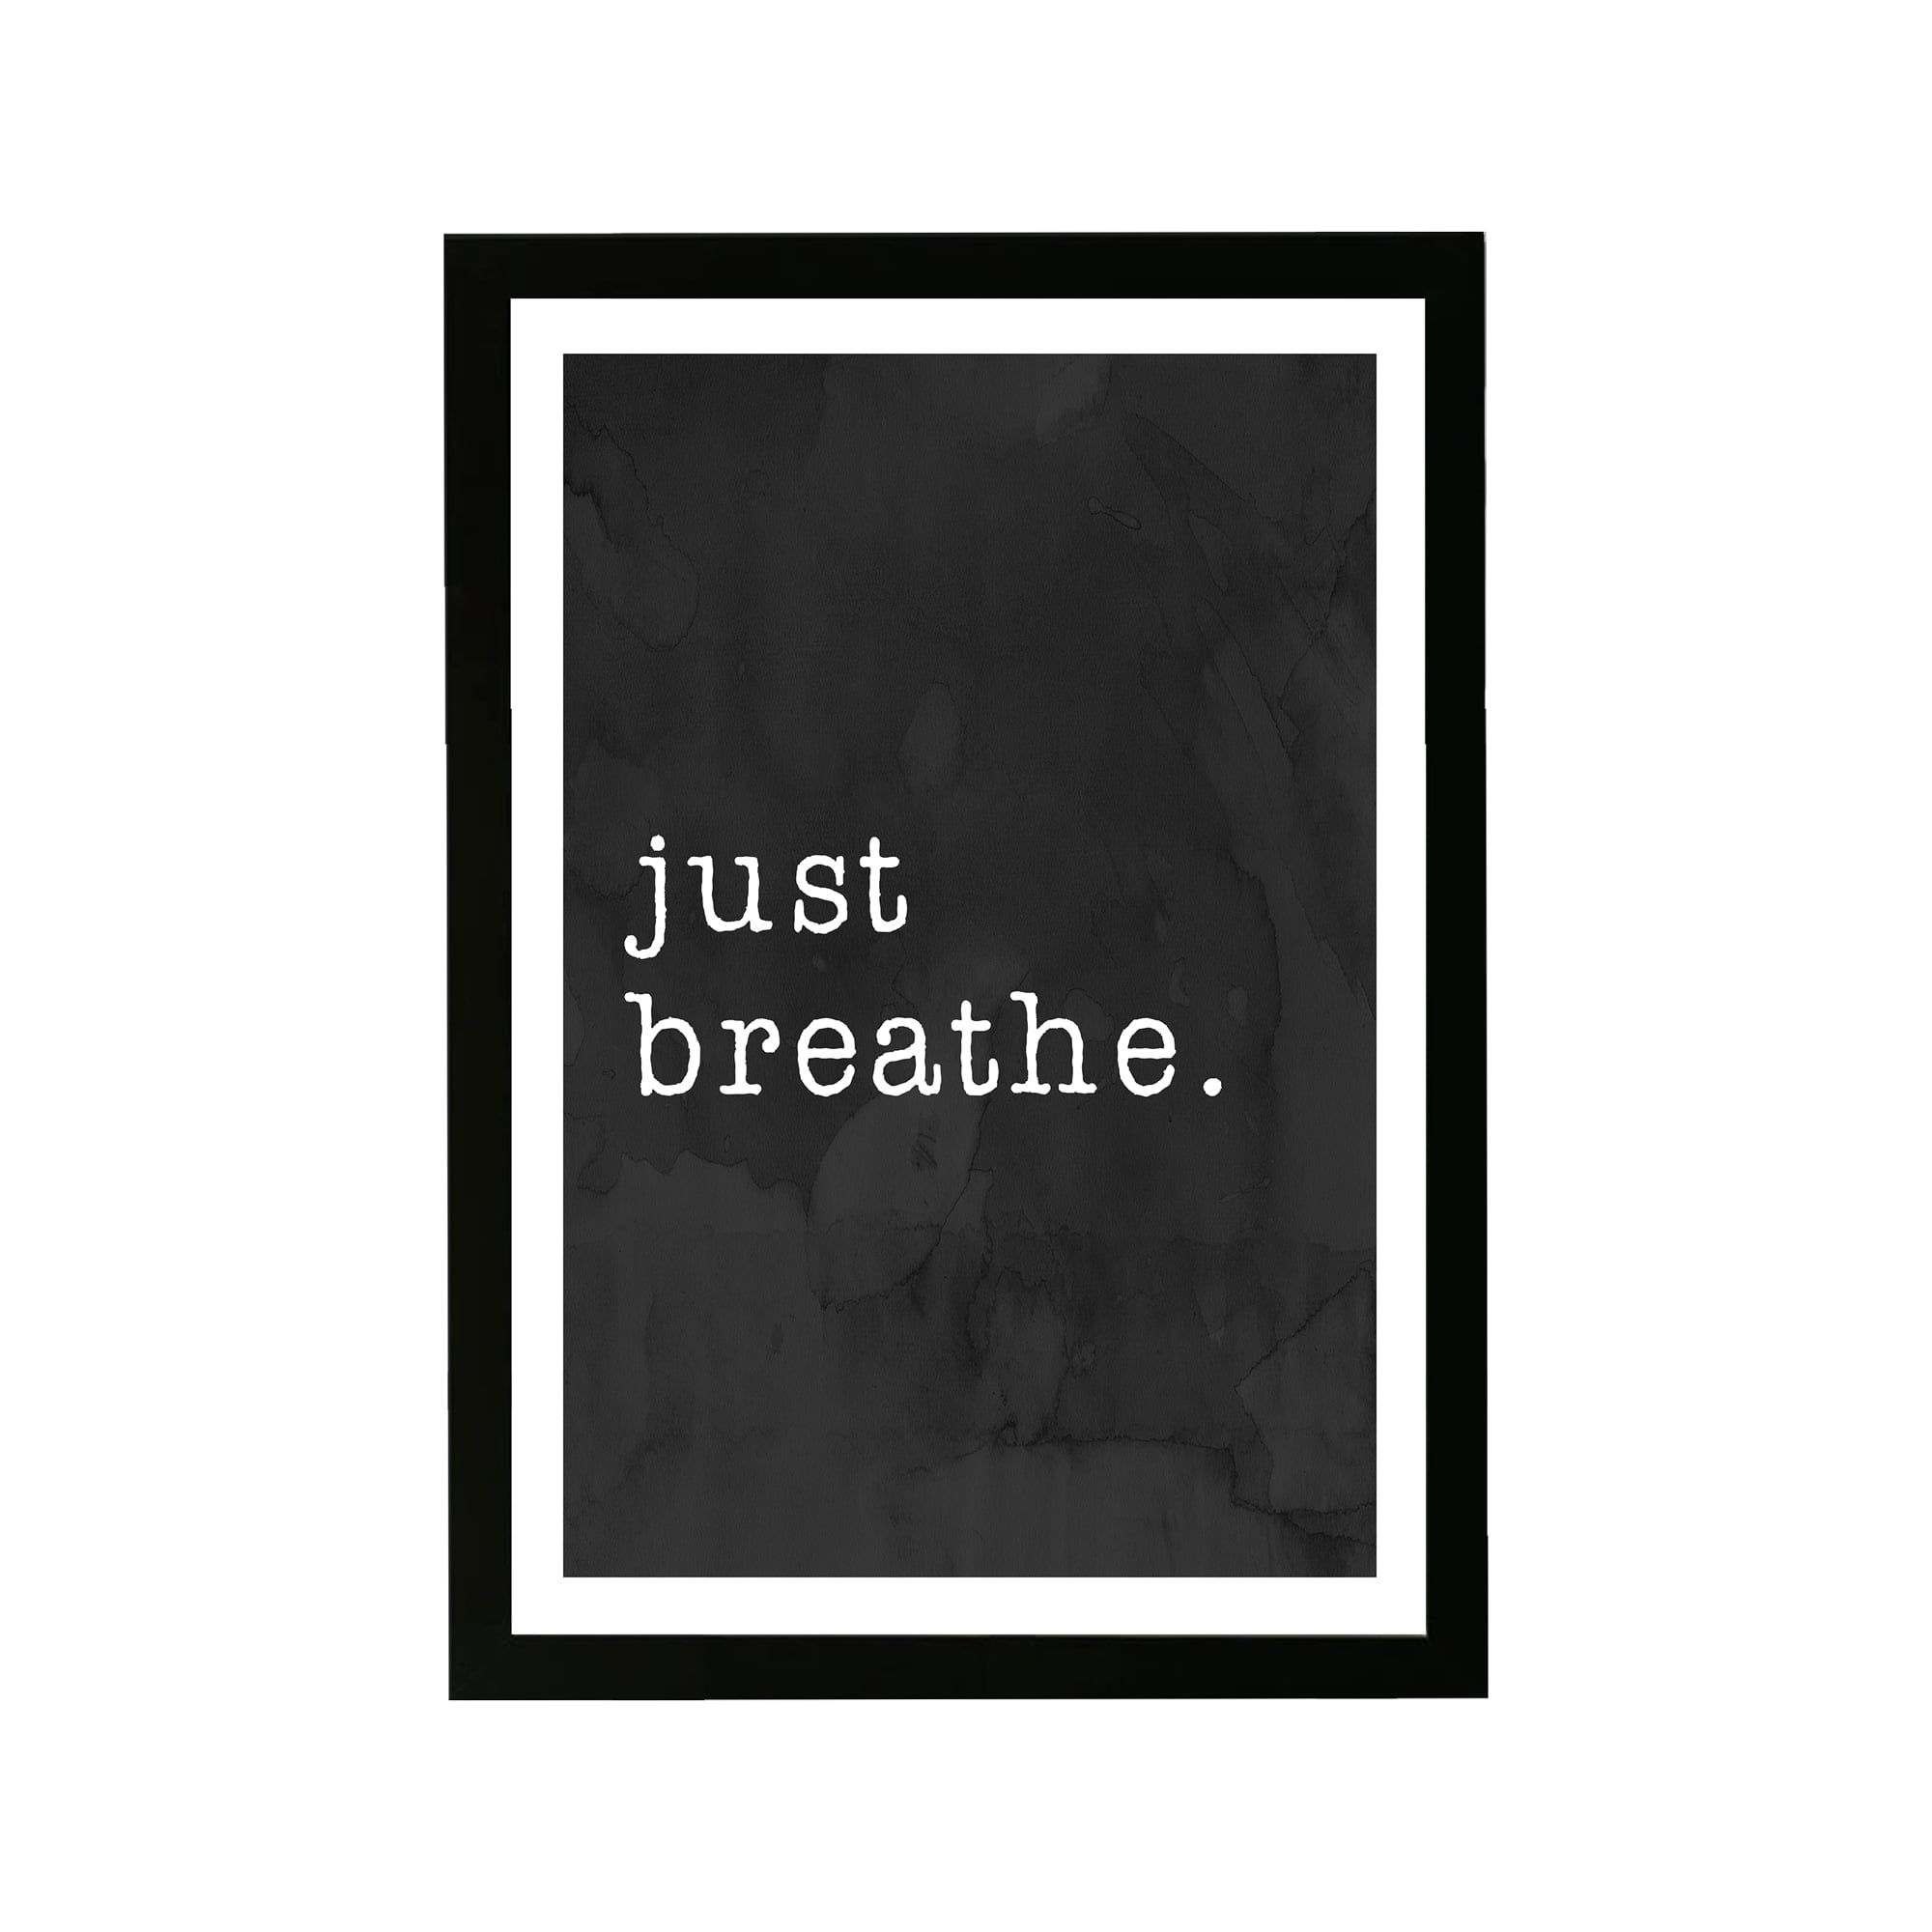 Wynwood Studio Typography And Quotes Framed Wall Art Prints Just Breathe Inspirational Quotes And Sayings Black White 13 X 19 Walmart Com Walmart Com